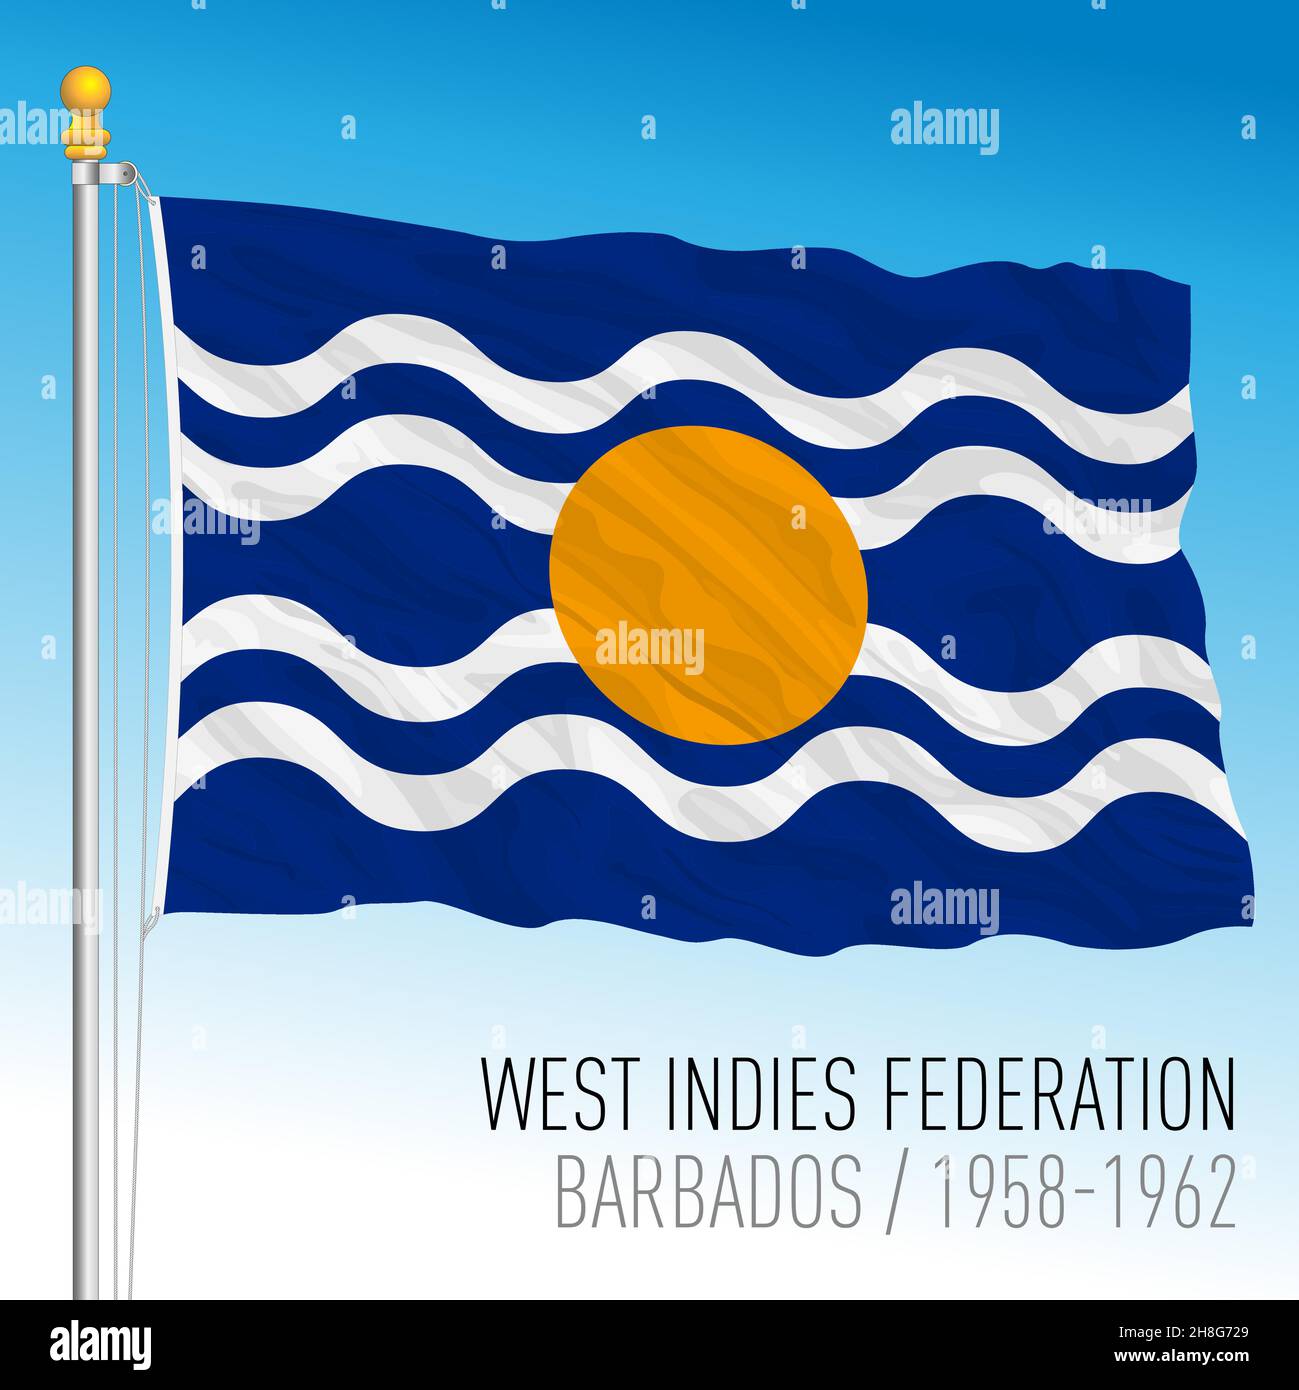 West Indies Federation historical flag, Barbados, 1958 - 1962, vector illustration Stock Vector